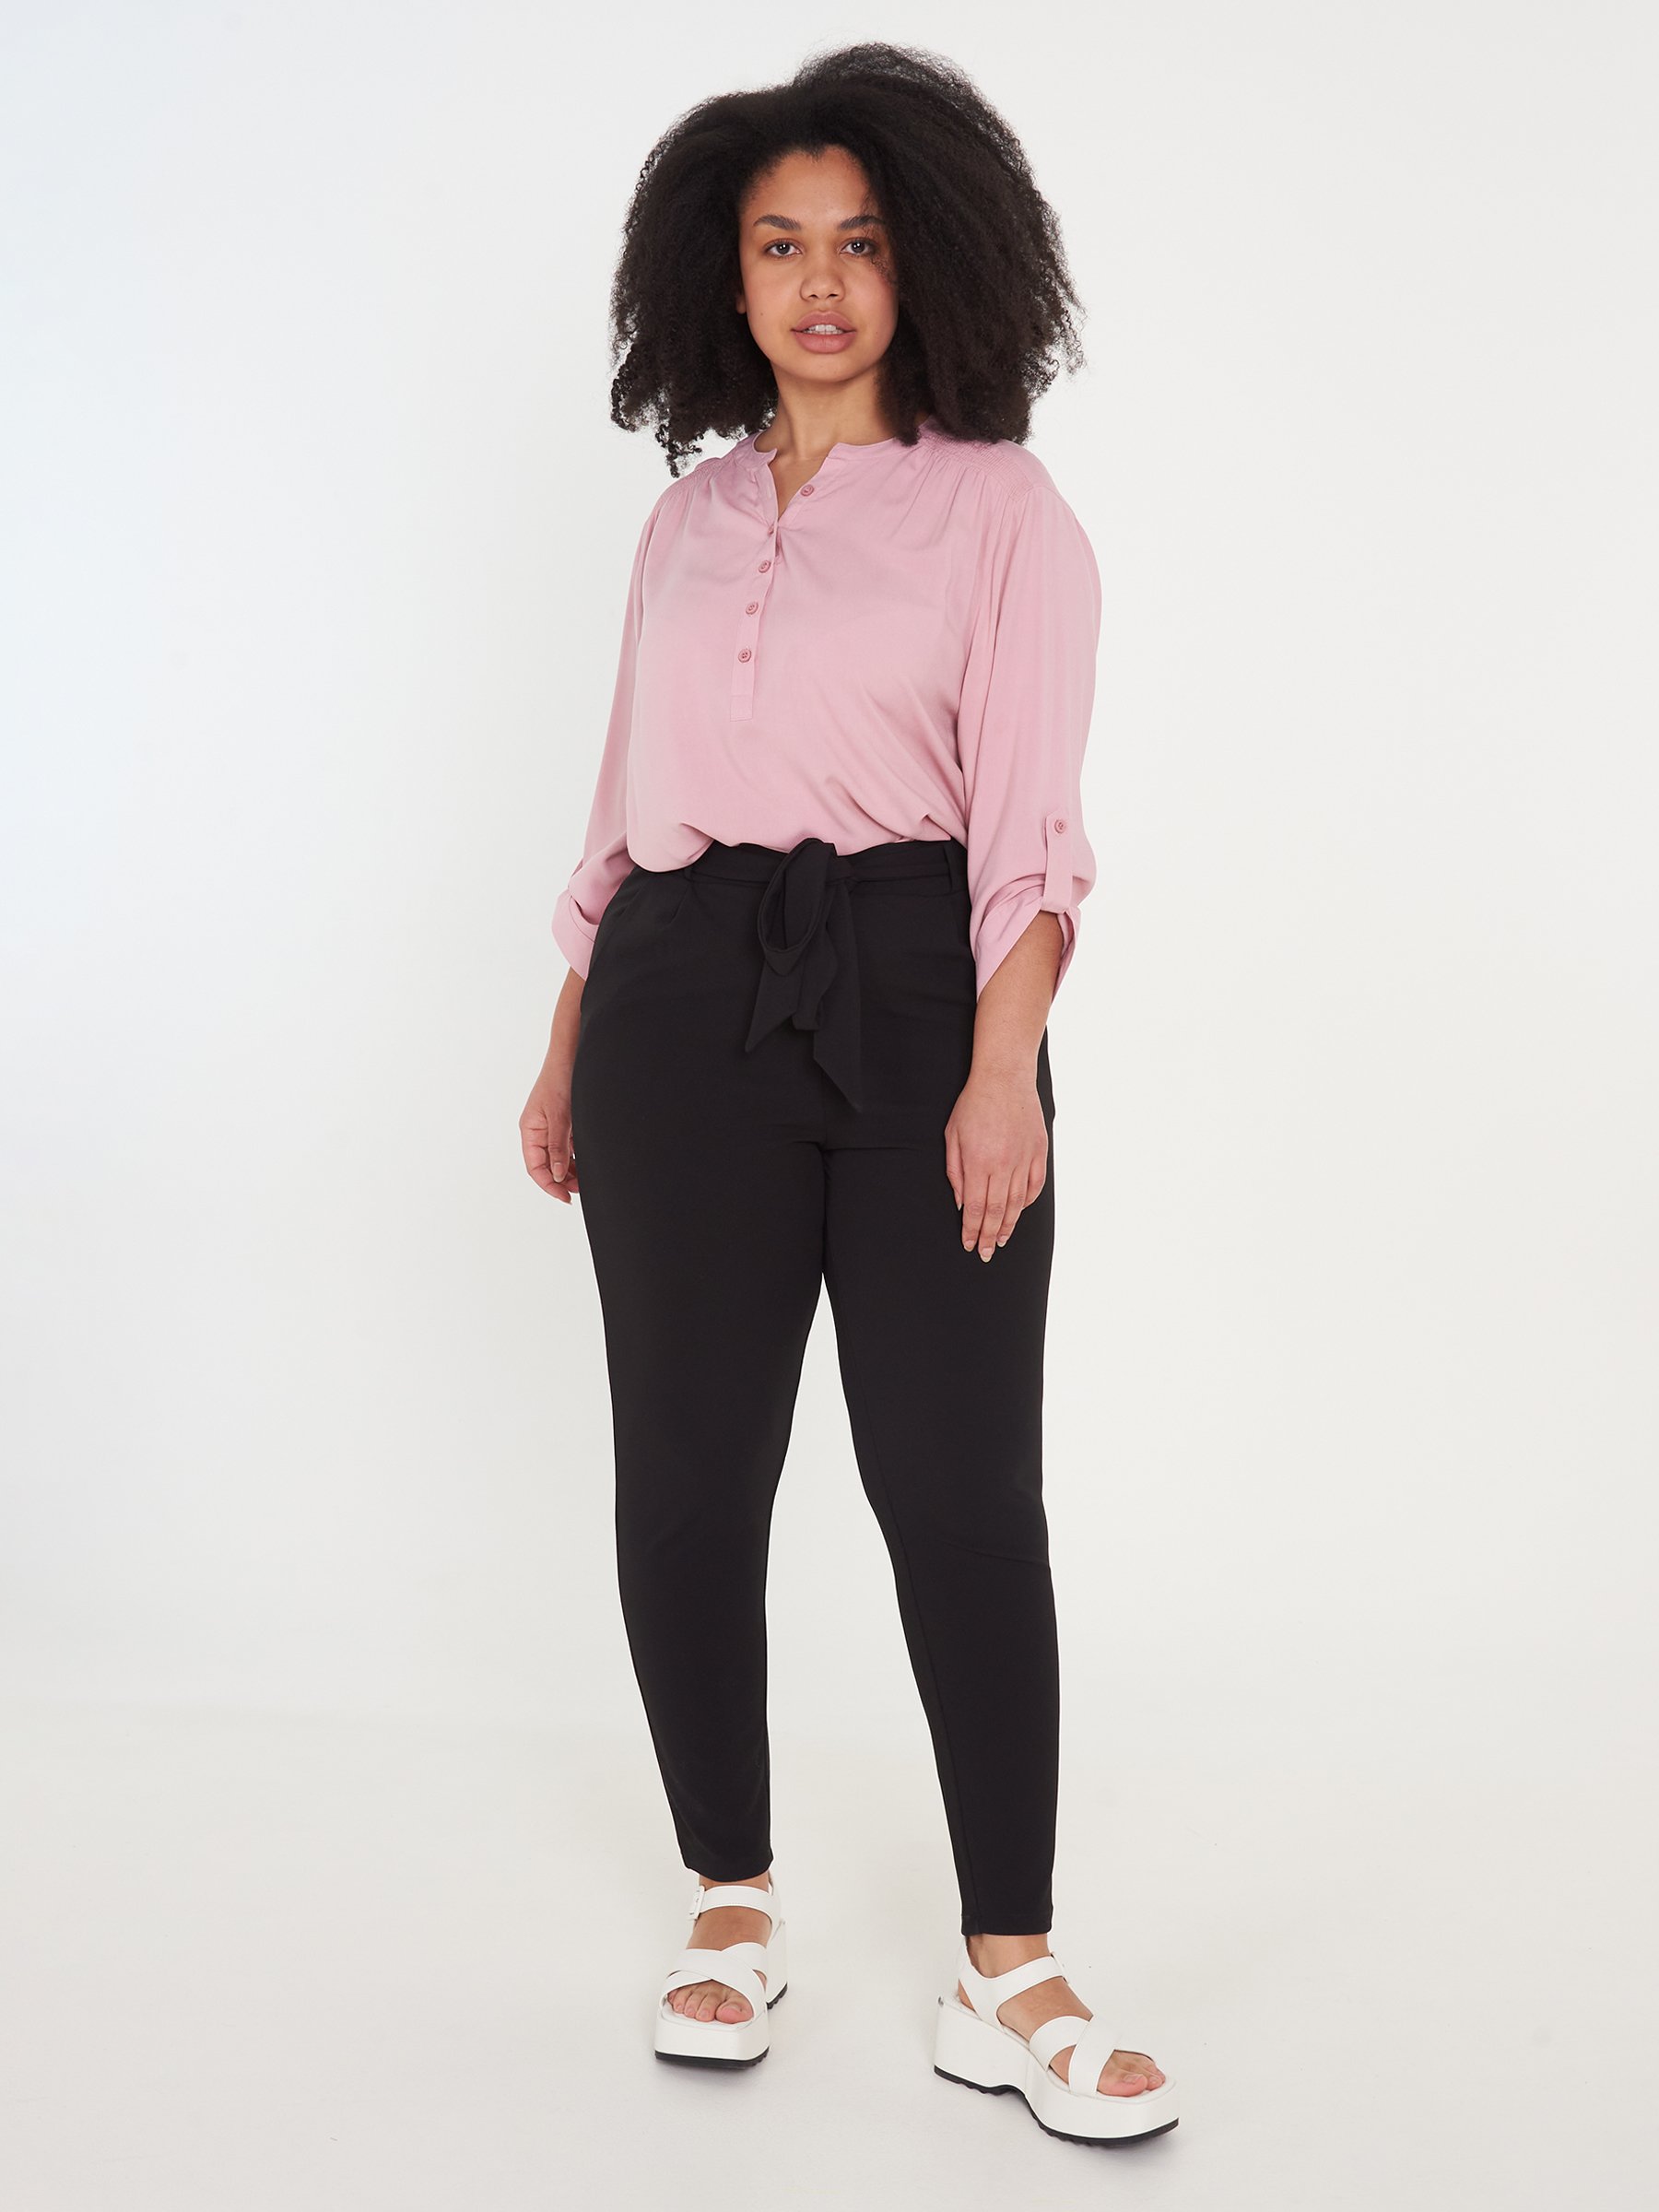 Plus Size Trousers | Women's Trousers & Pants | Simply Be